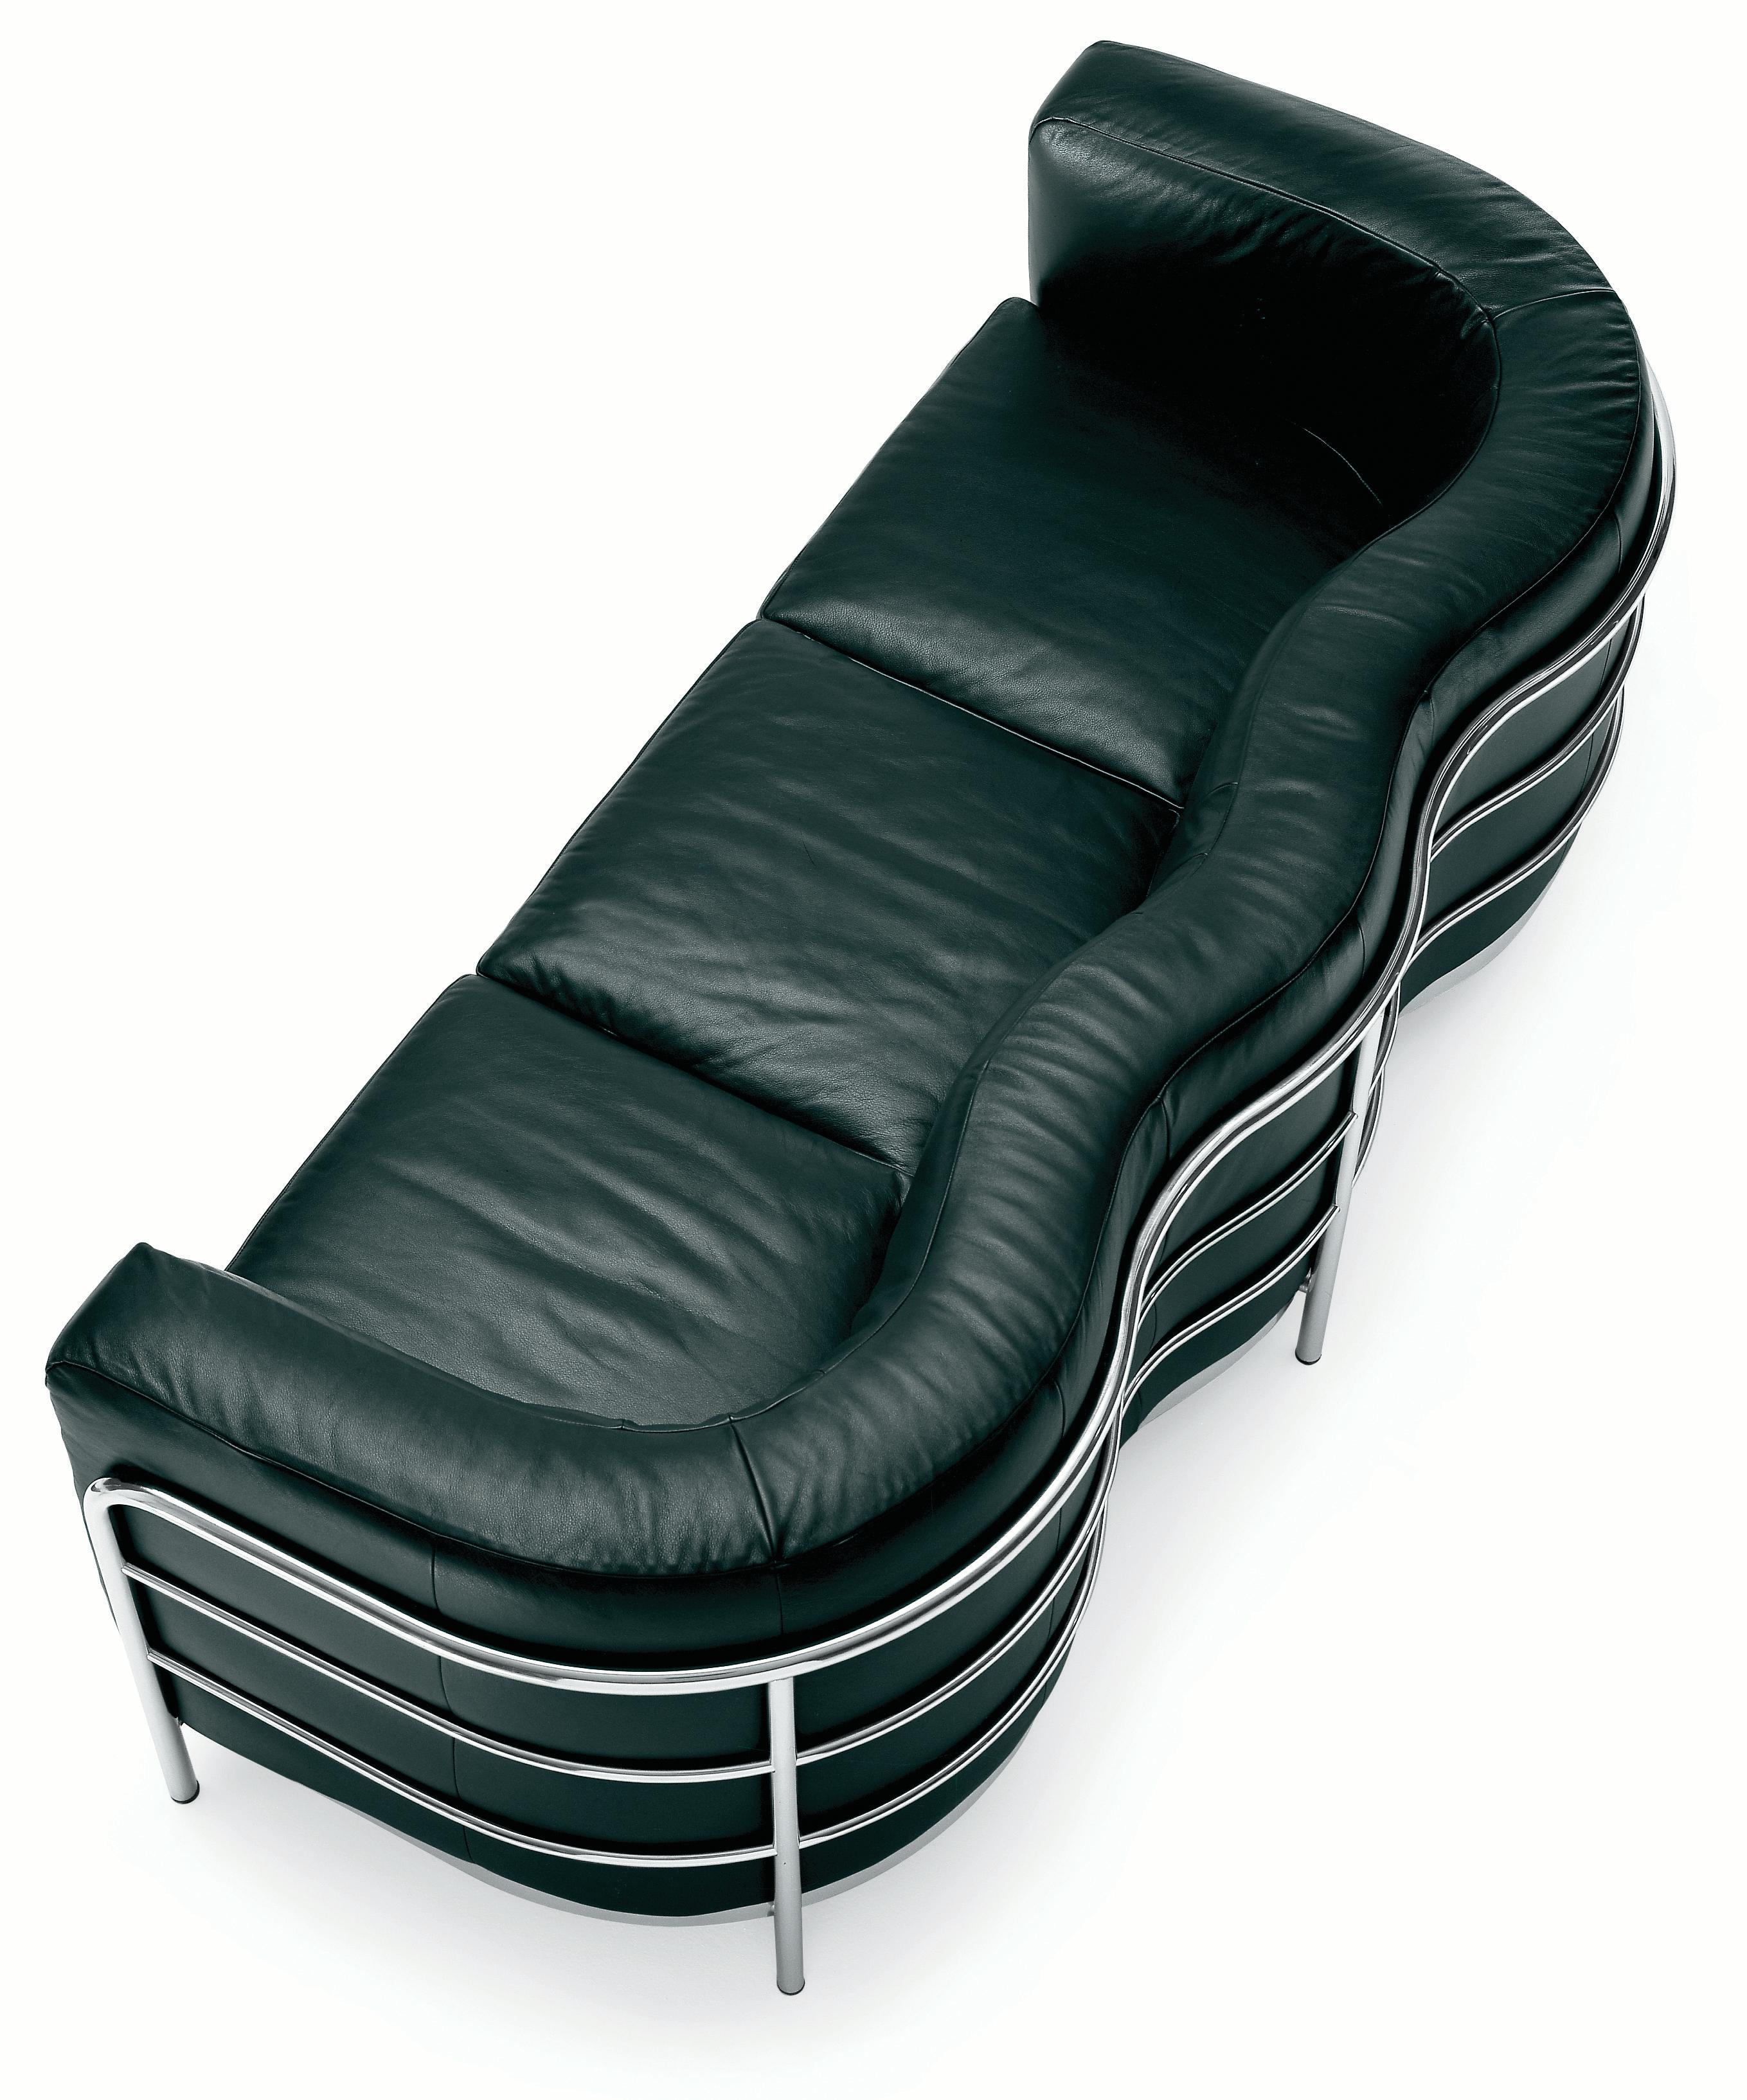 Zanotta Onda Armchair Three-Seater Sofa in Black Leather & Stainless Steel Frame by De Pas, D’Urbino, Lomazzi

18/8 stainless steel tubular frame. Upholstery in graduated polyurethane/ heat-bound polyester fibre. Removable fabric or leather cover.